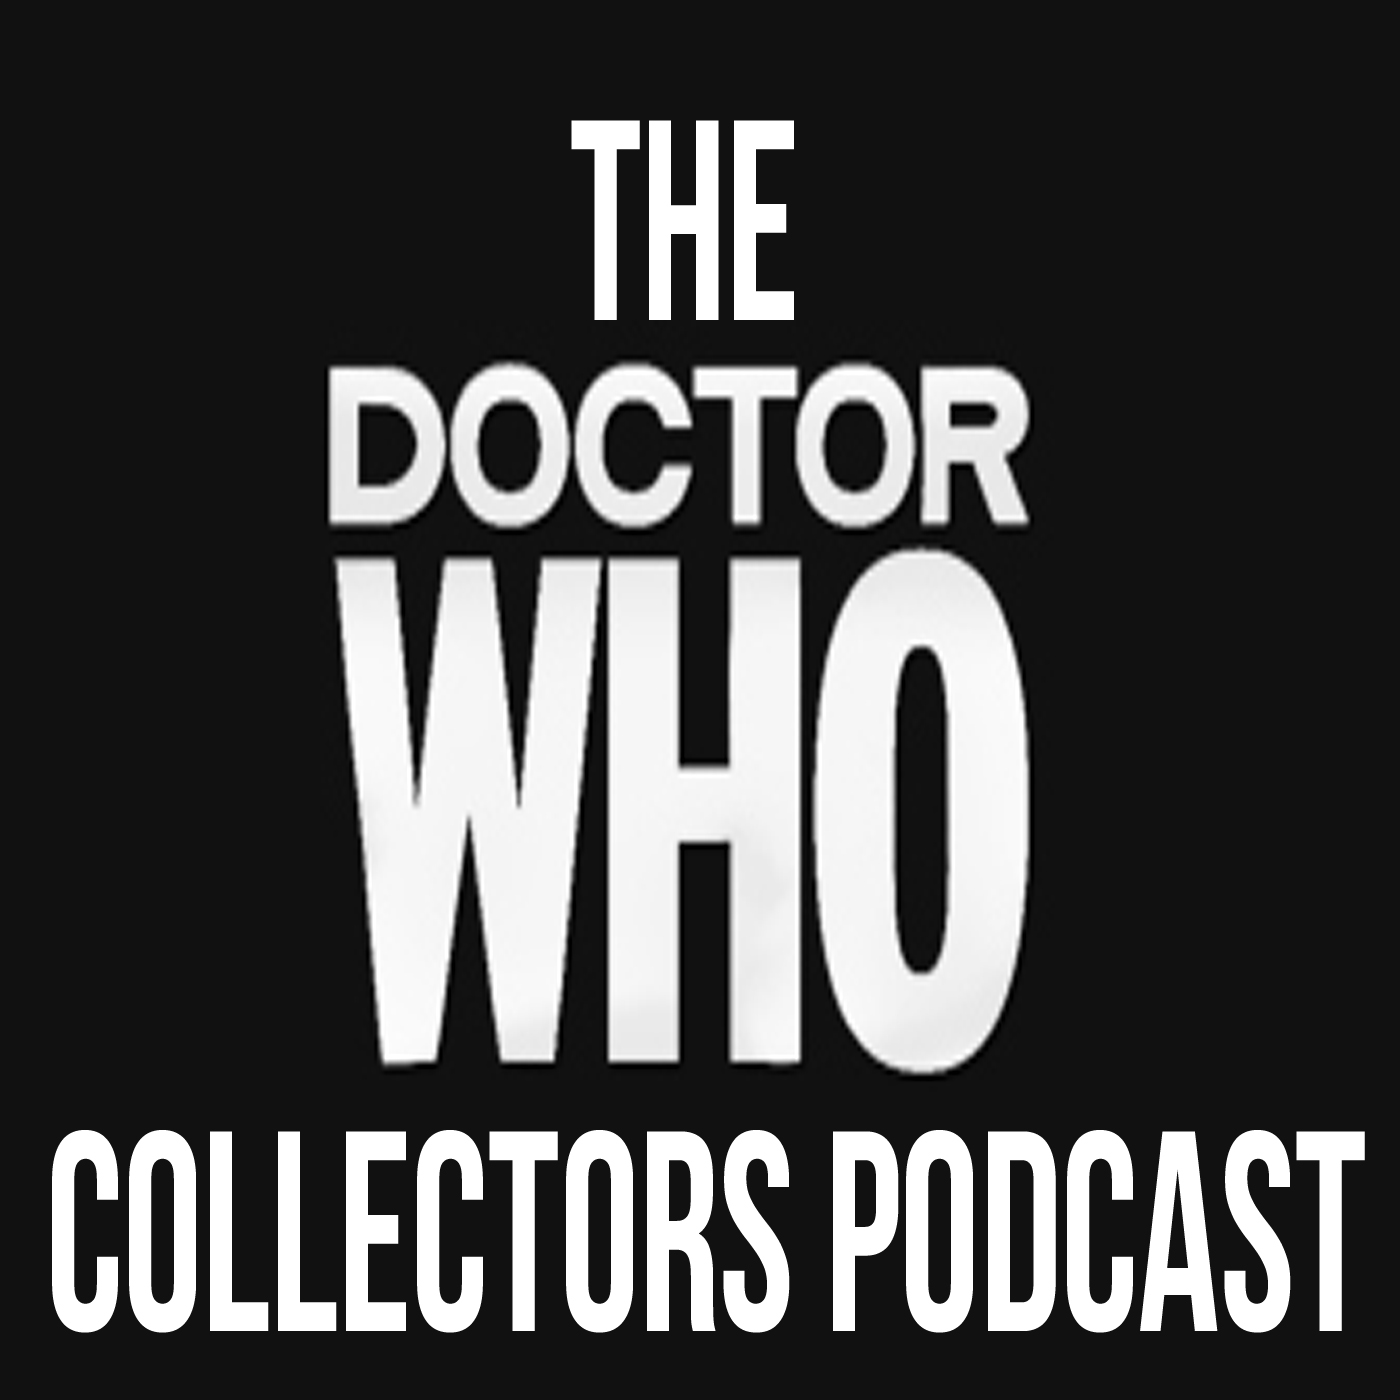 Thumbnail for Episode 48: Dr. Who Classic Hardcovers Year 4 (1977) with Tony Whitt